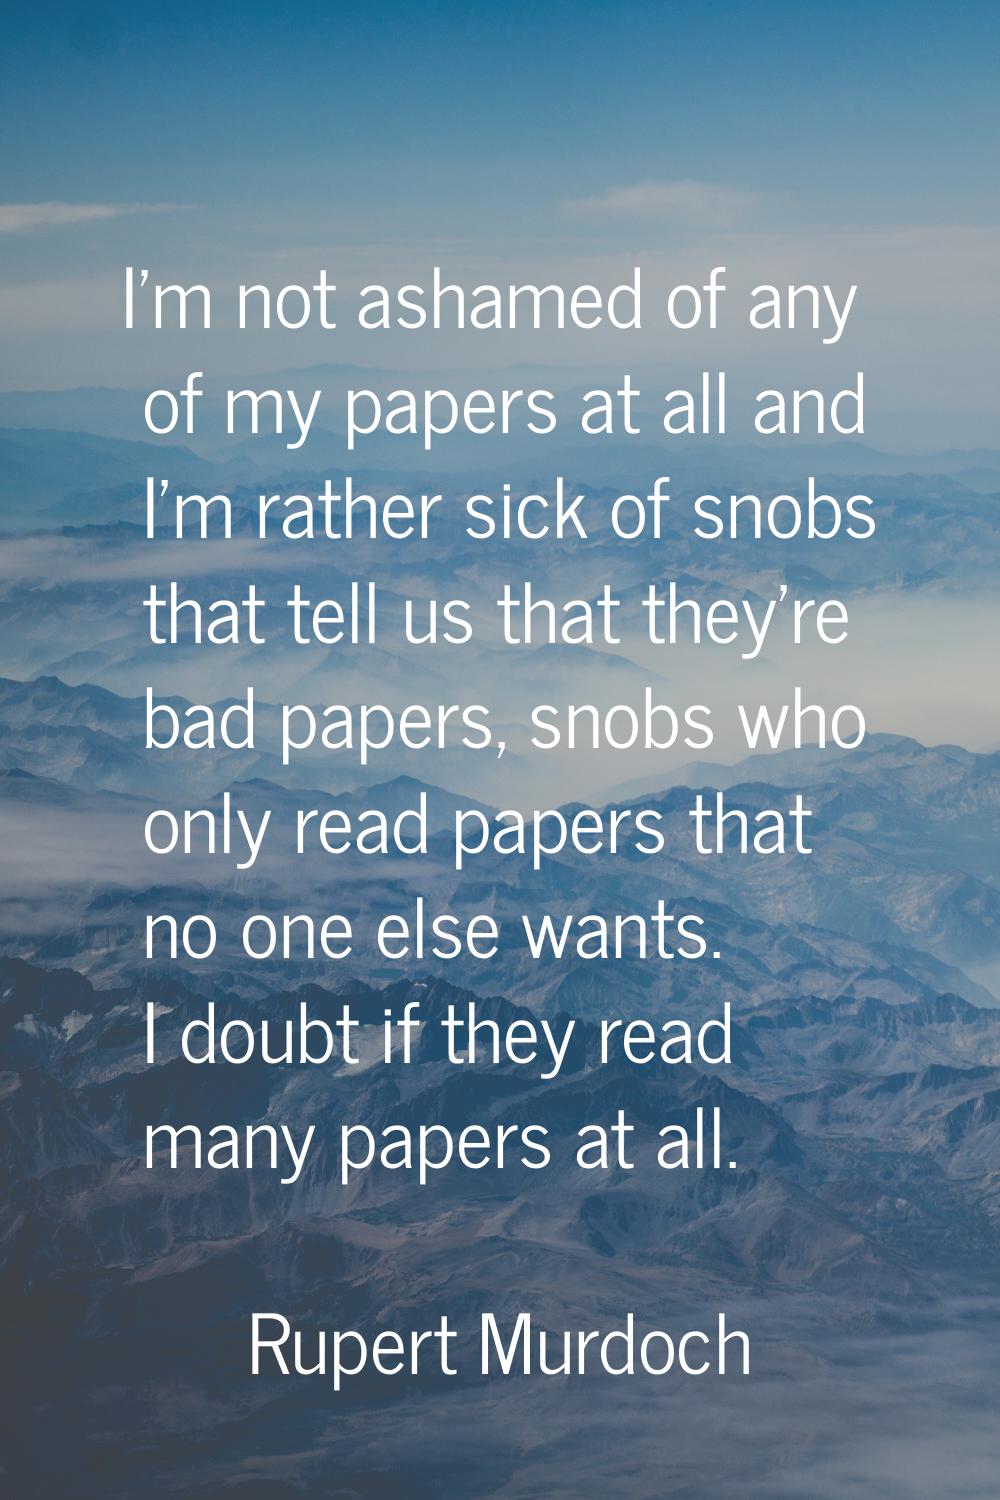 I'm not ashamed of any of my papers at all and I'm rather sick of snobs that tell us that they're b